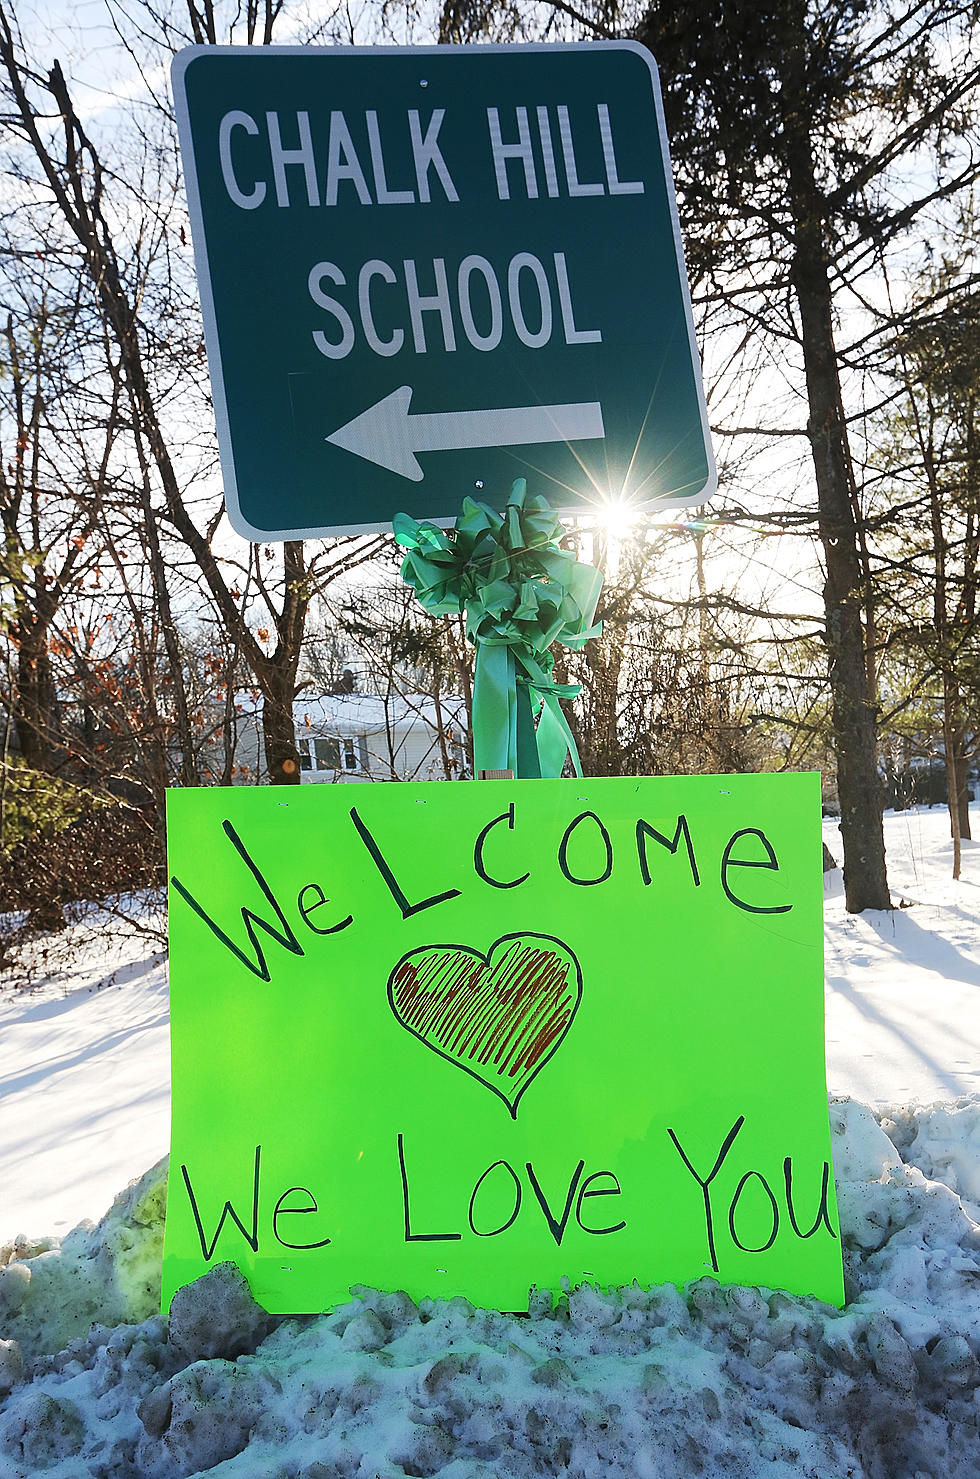 Sandy Hook Students Welcomed in New School [POLL]